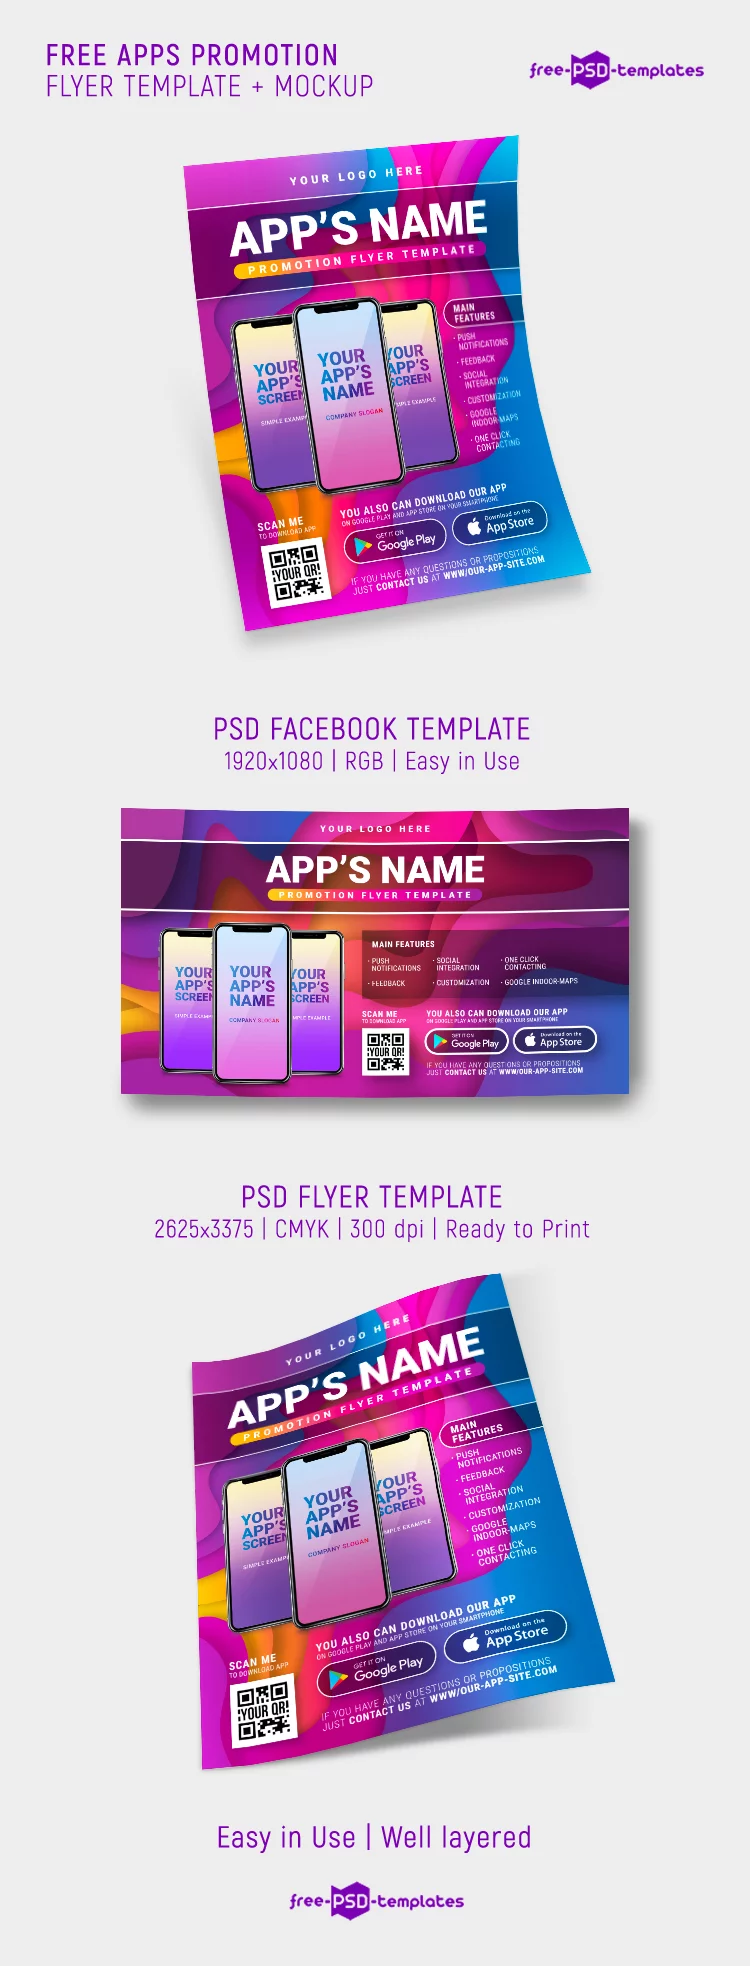 Free Apps Promotion Flyer Template